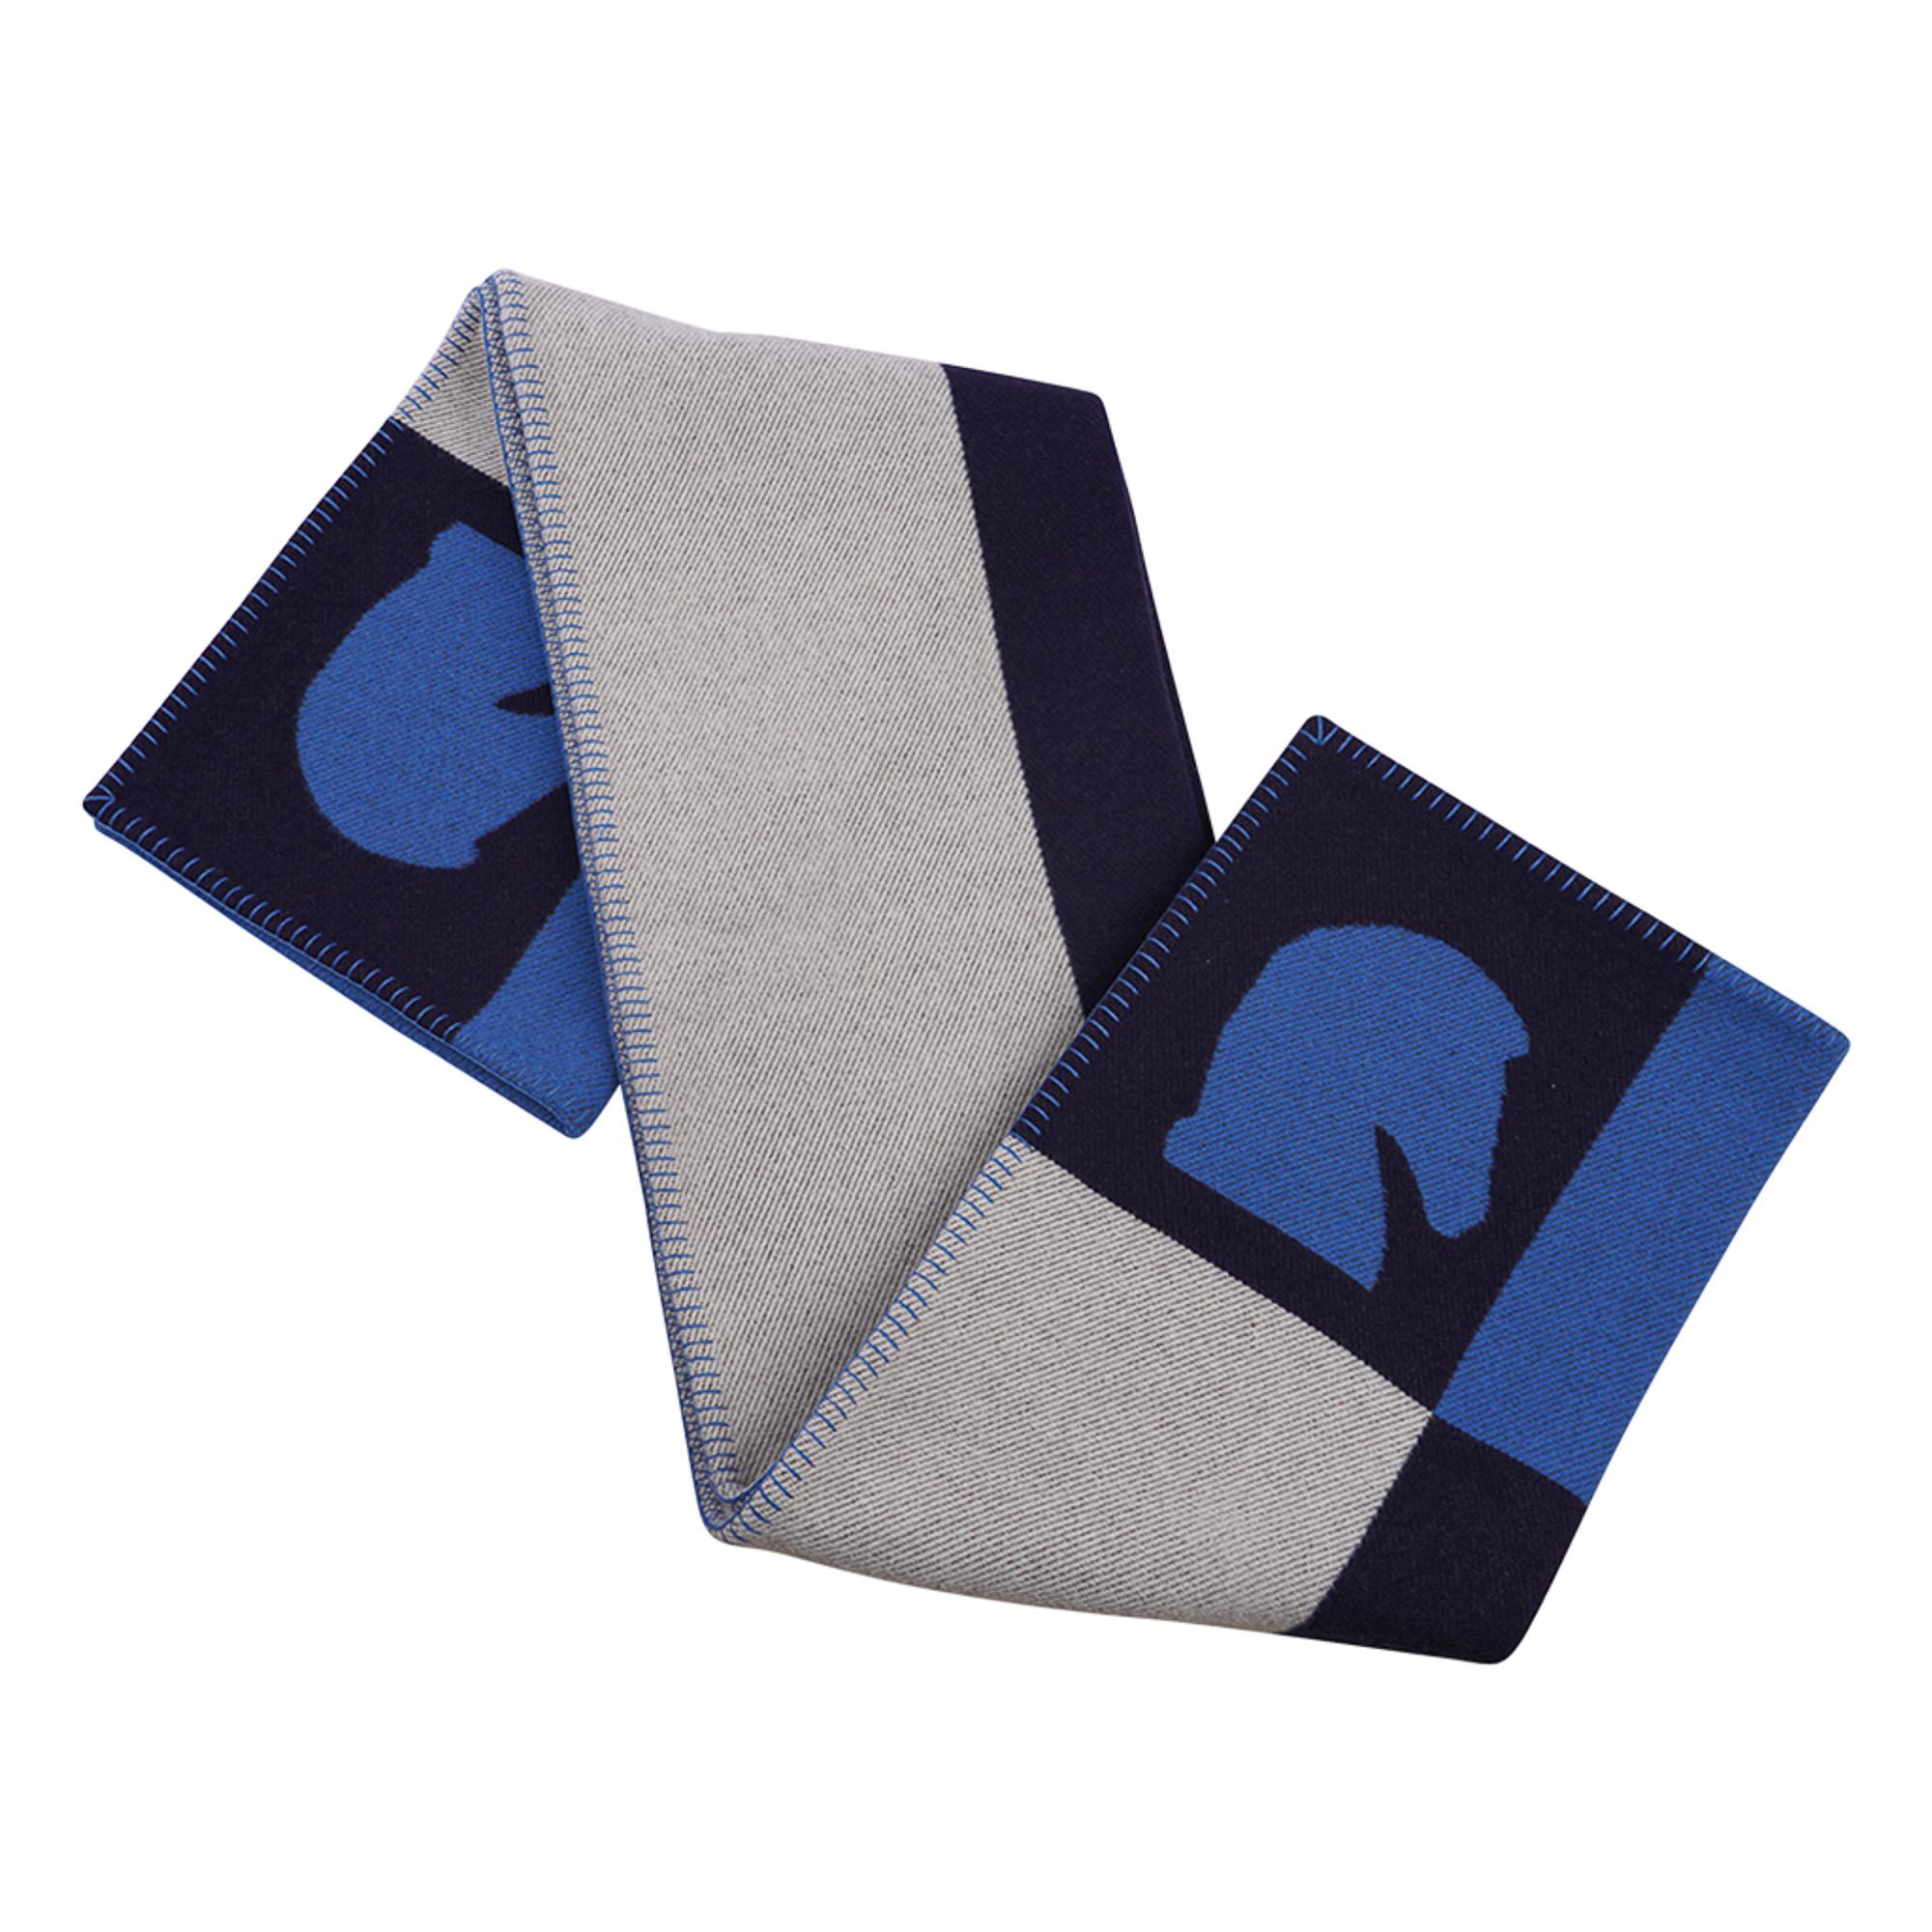 Mightychic offers a limited edition Hermes Samarcande Blanket featured in Marine colorway.
Created from 90% Wool and 10% Cashmere this wonderfully warm blanket is a chic addition to any room.
Exquisite fresh modern creation!
New or Pristine Store